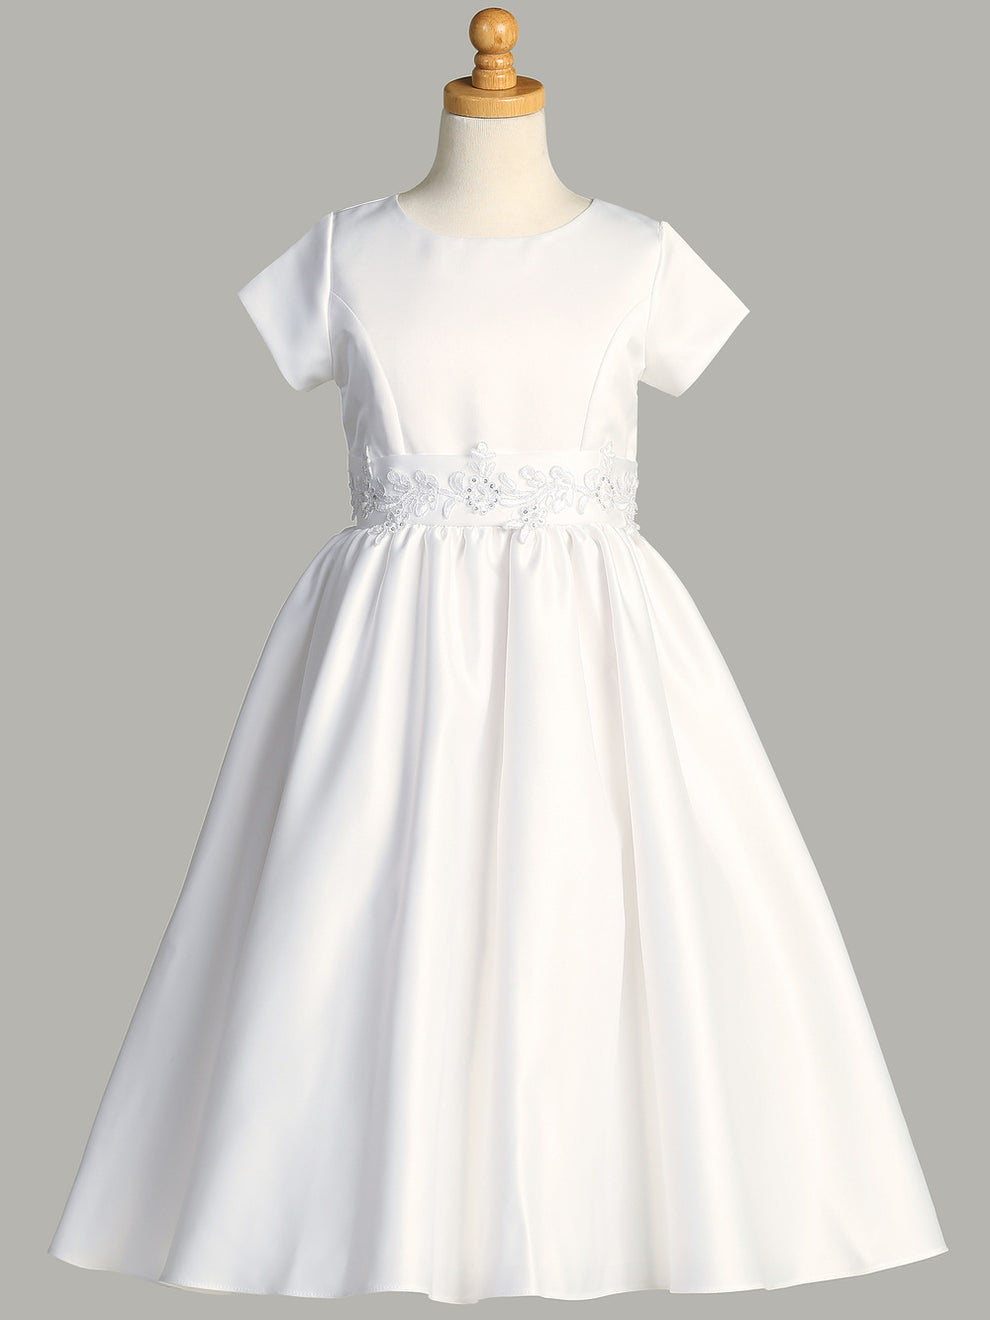 Elegant Girls' First Communion Dress with Sequins - Malcolm Royce